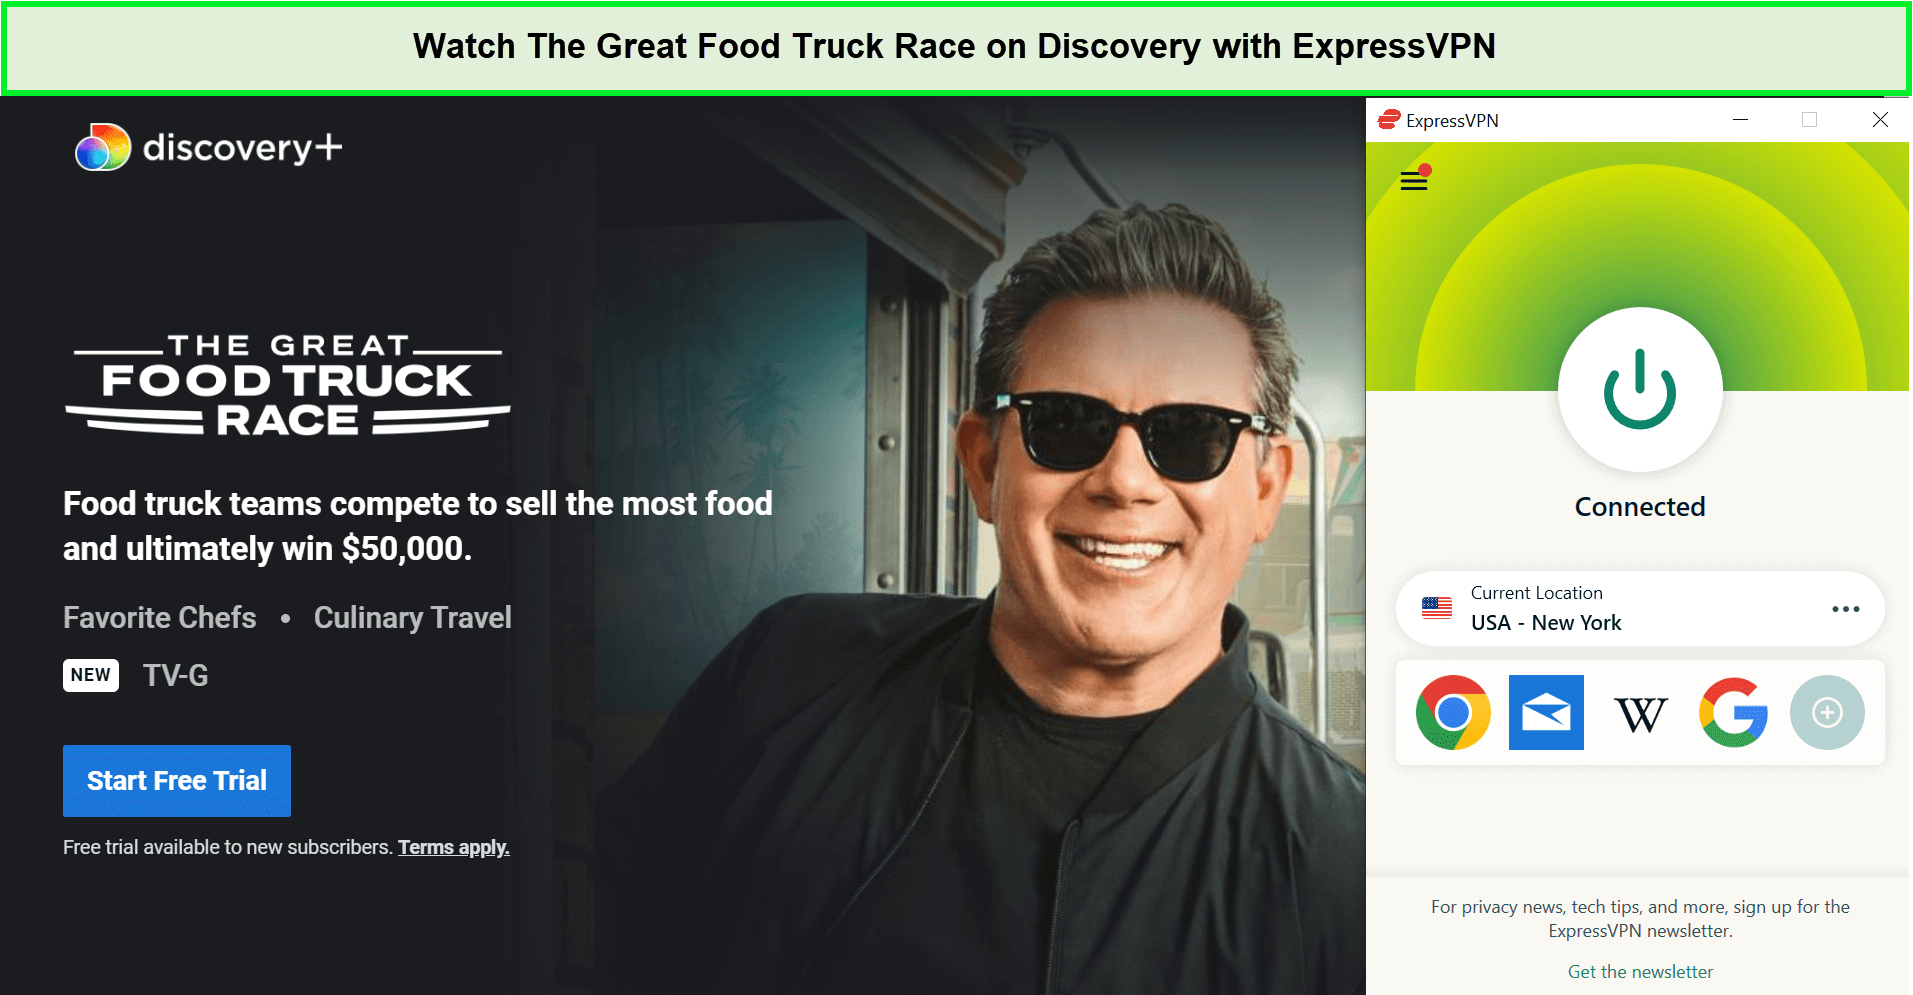 Watch-The-Great-Food-Truck-Race-in-it-on-Discovery-with-ExpressVPN